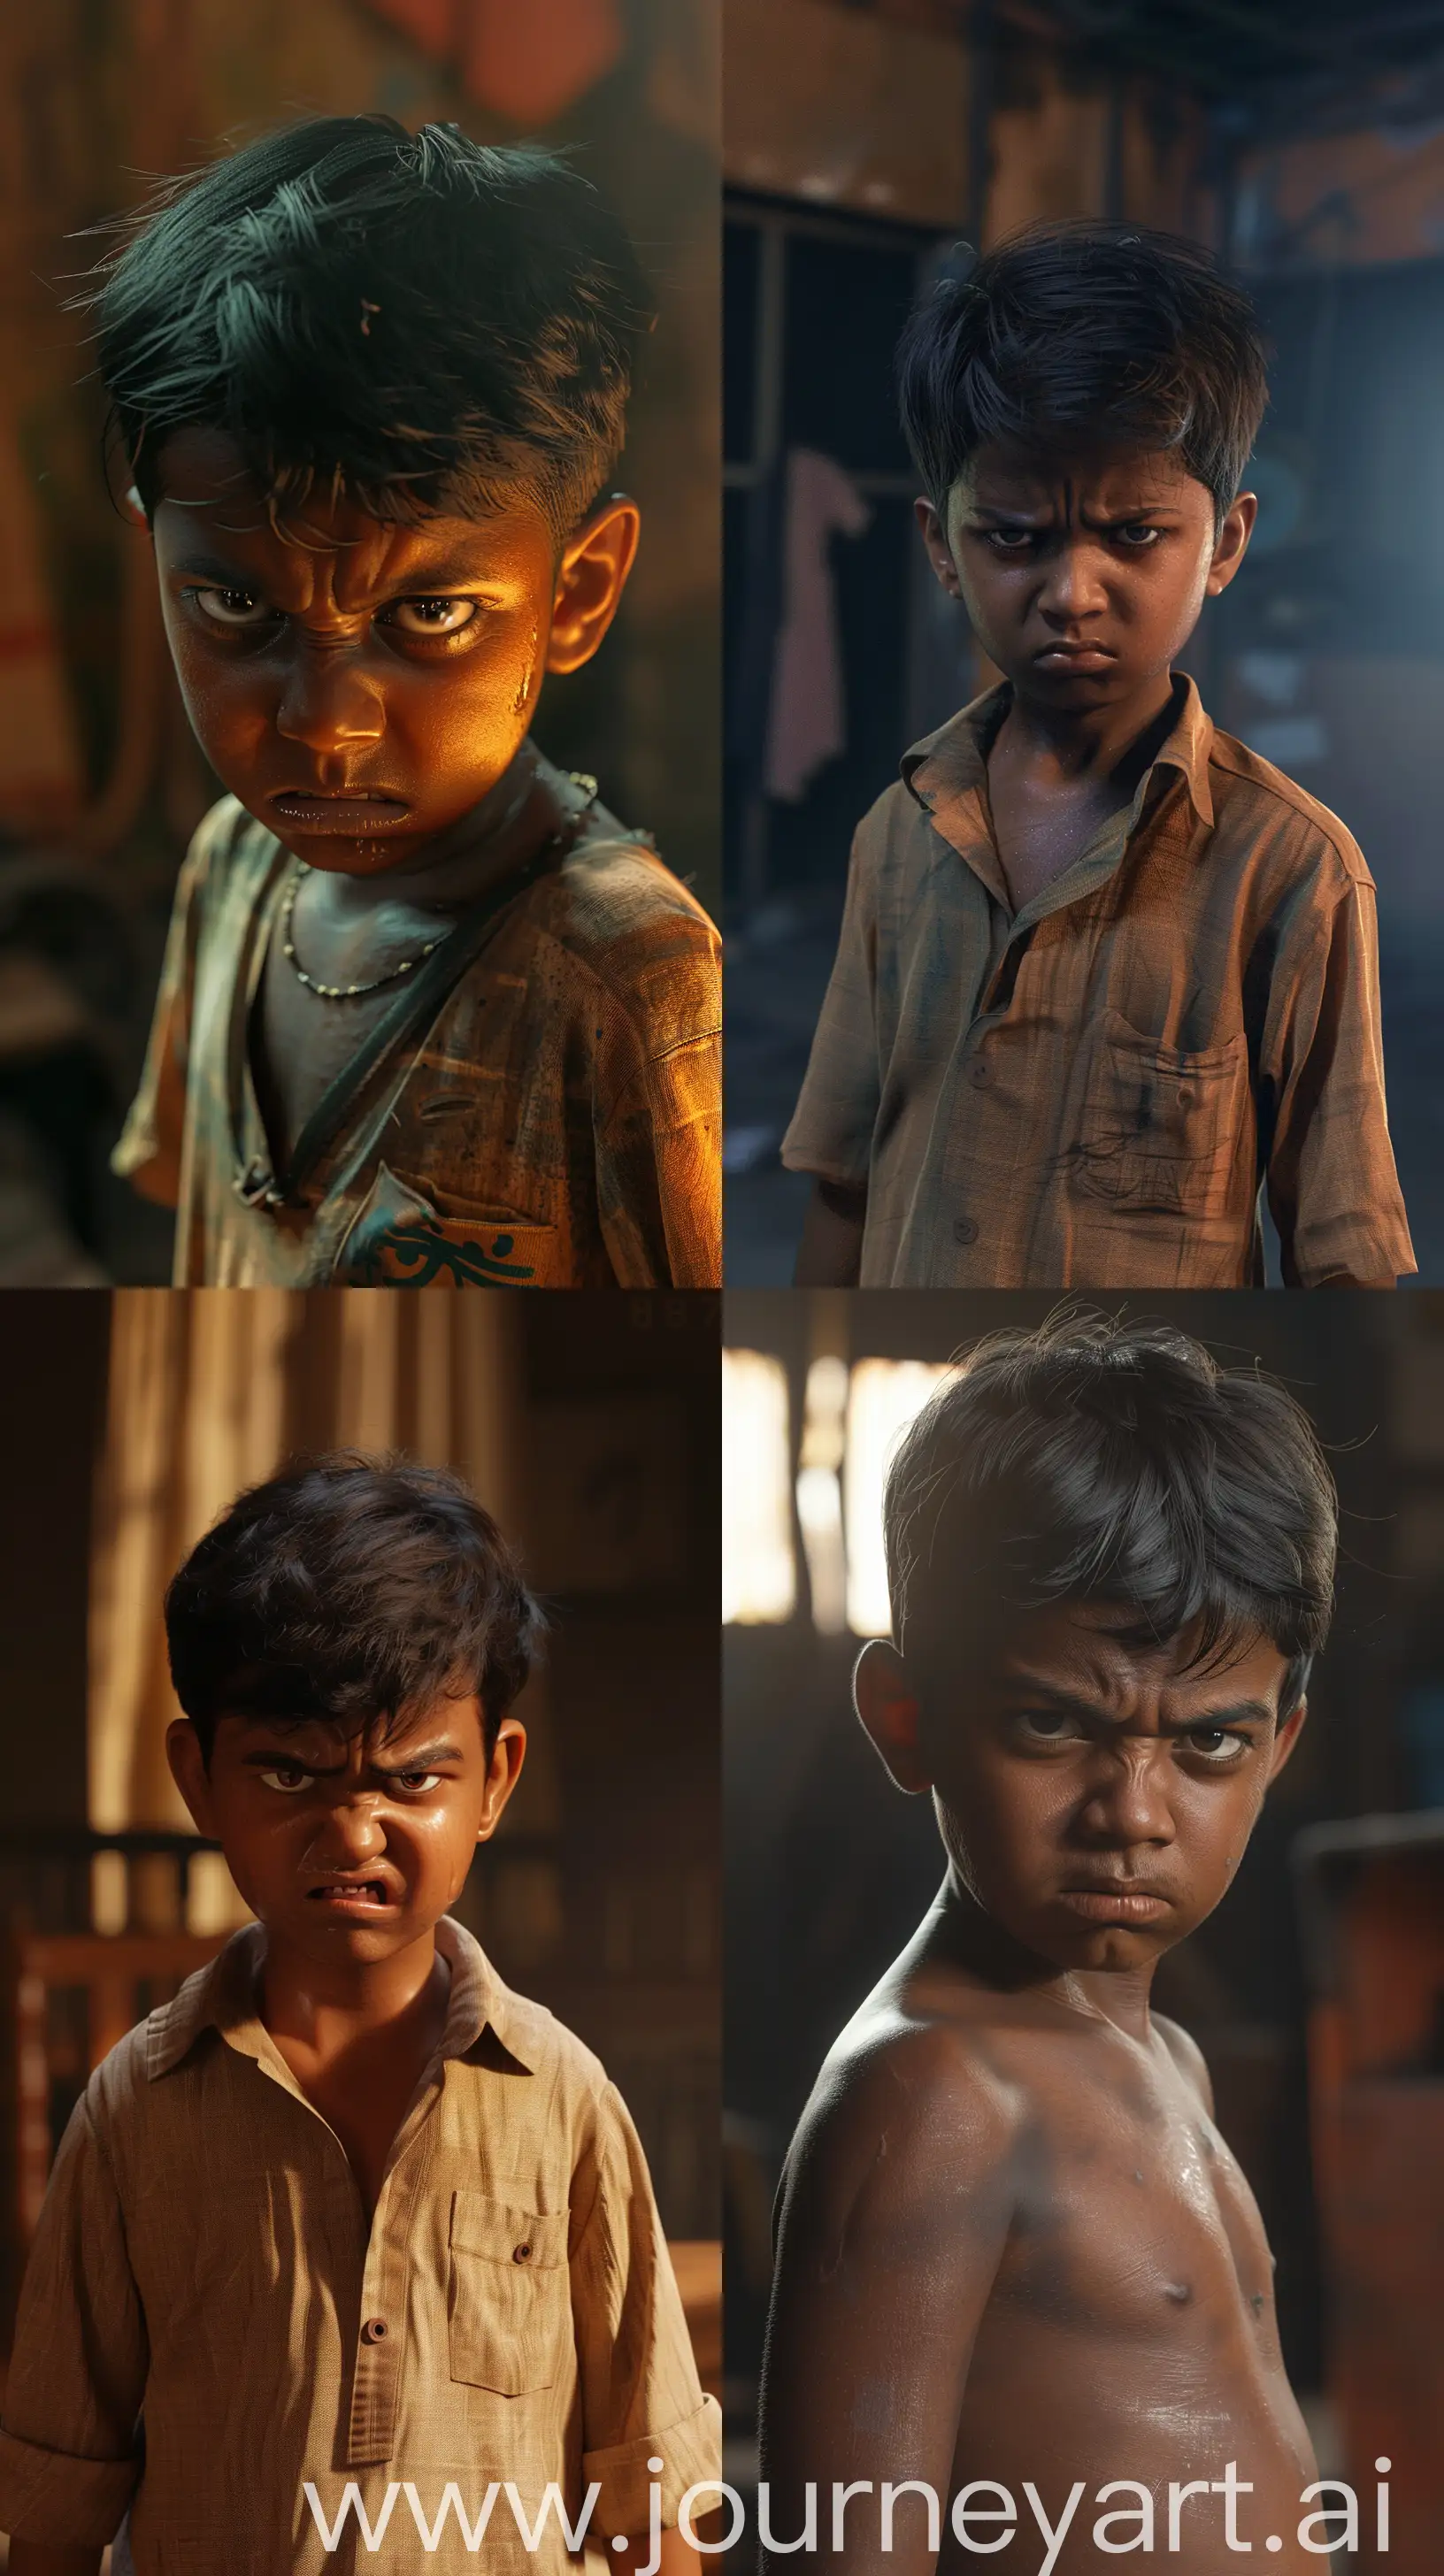 Intense-Indian-Child-Portrait-in-Cinematic-Ambiance